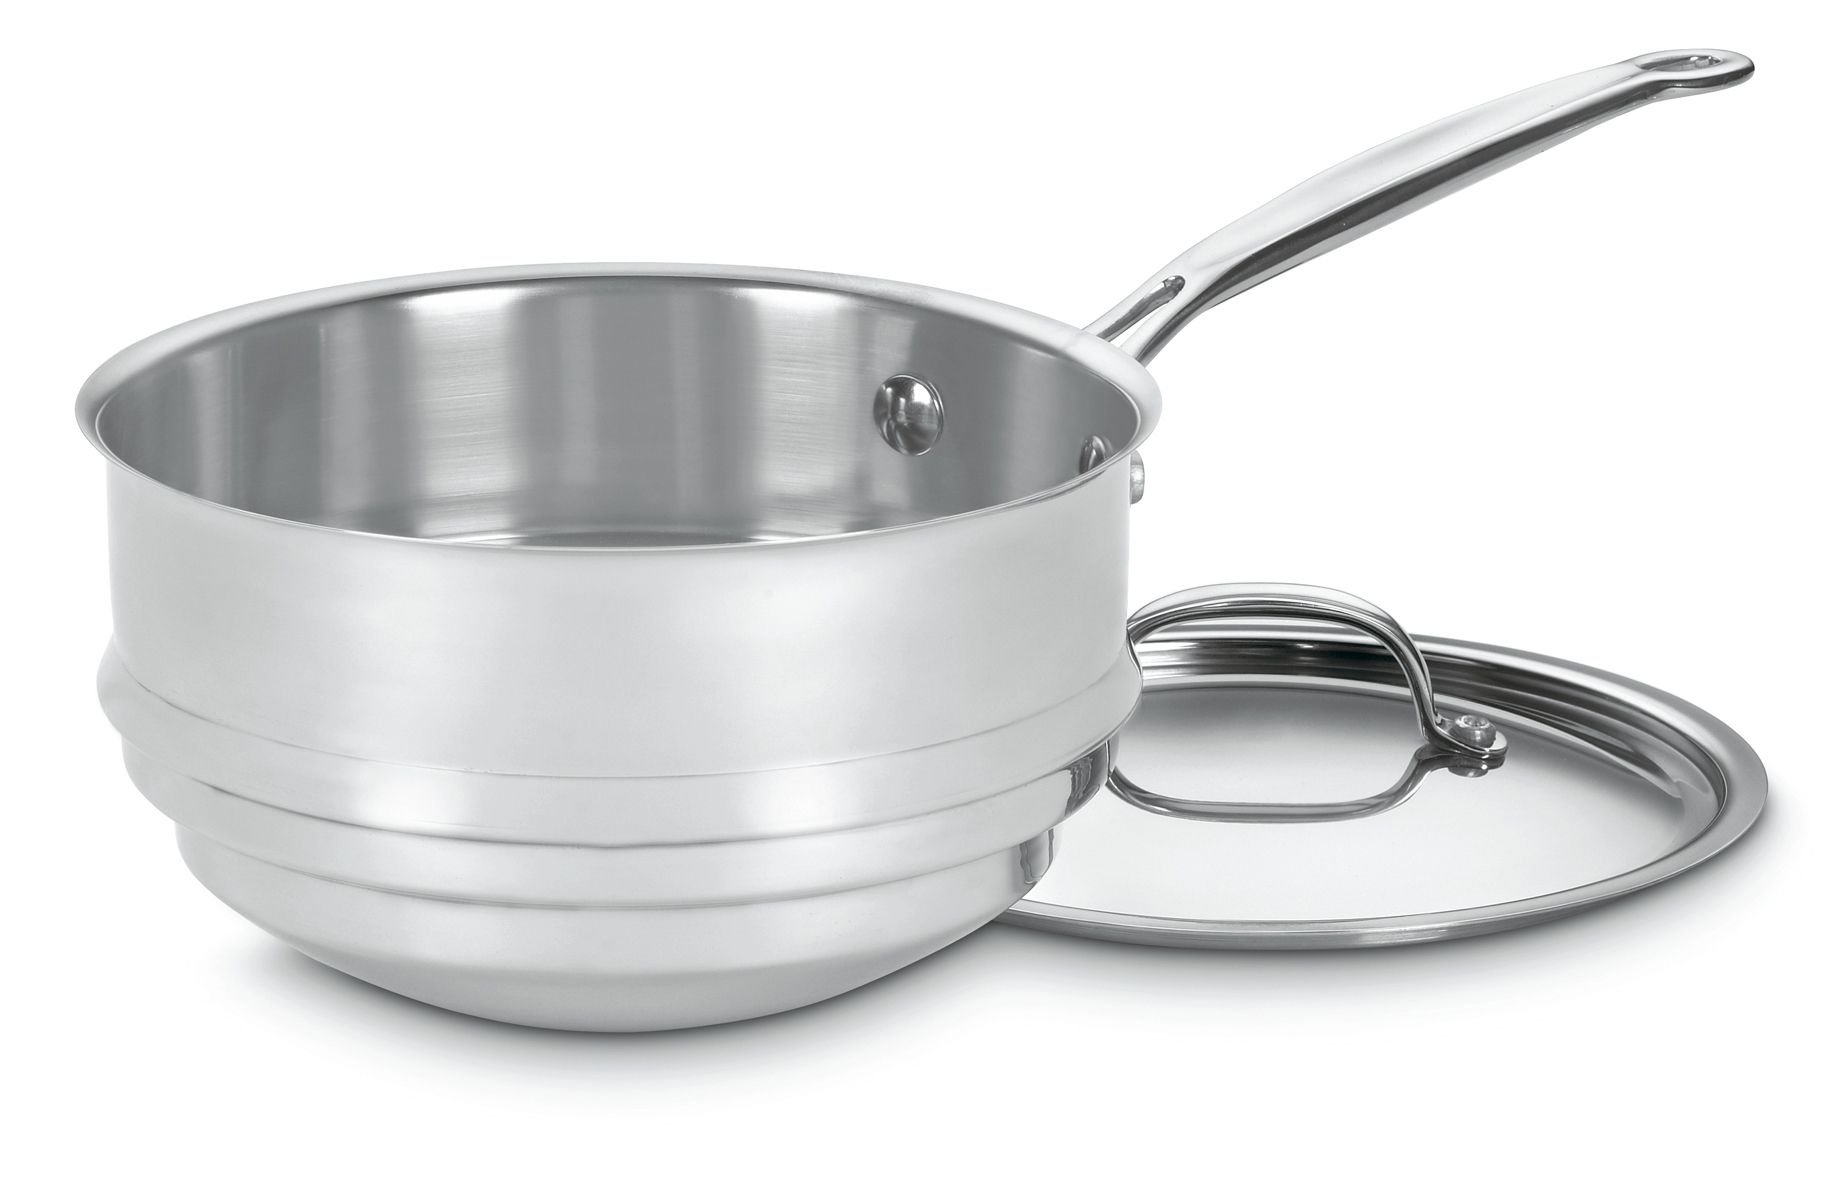 Cuisinart 7193-20P Chef's Classic Stainless 3-Quart Cook and Pour